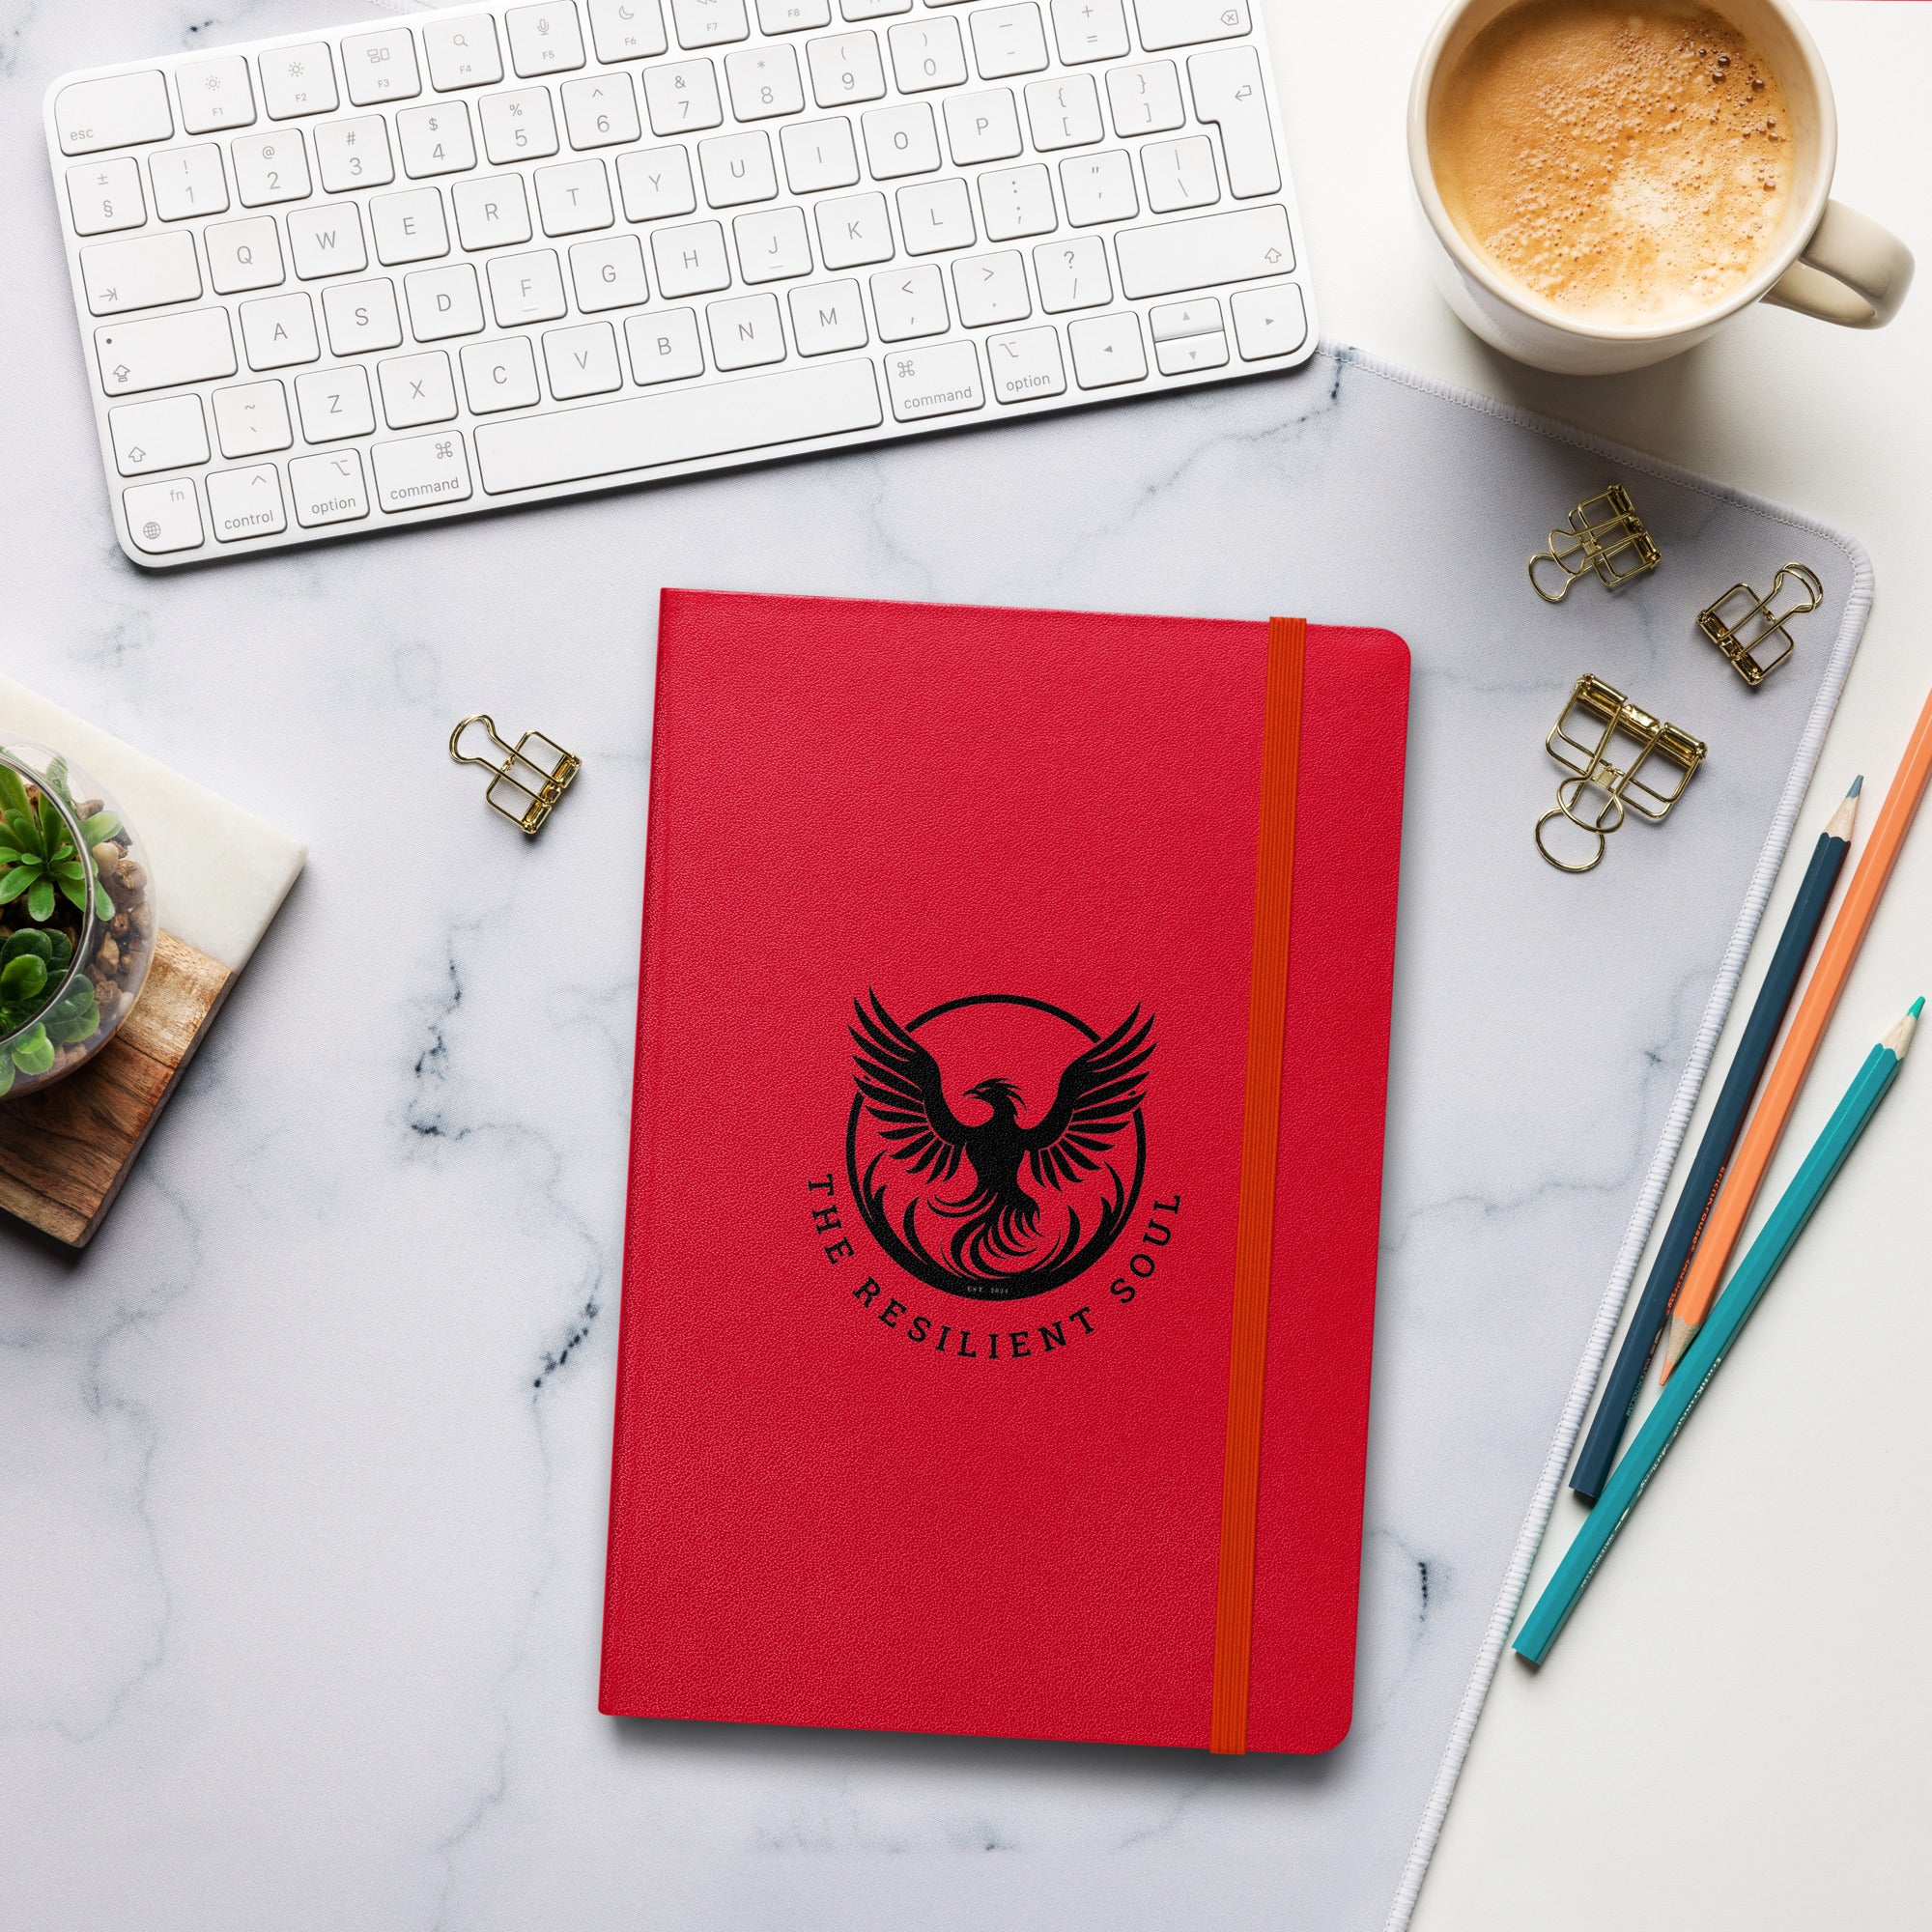 The Resilient Soul Hardcover bound notebook - My Store